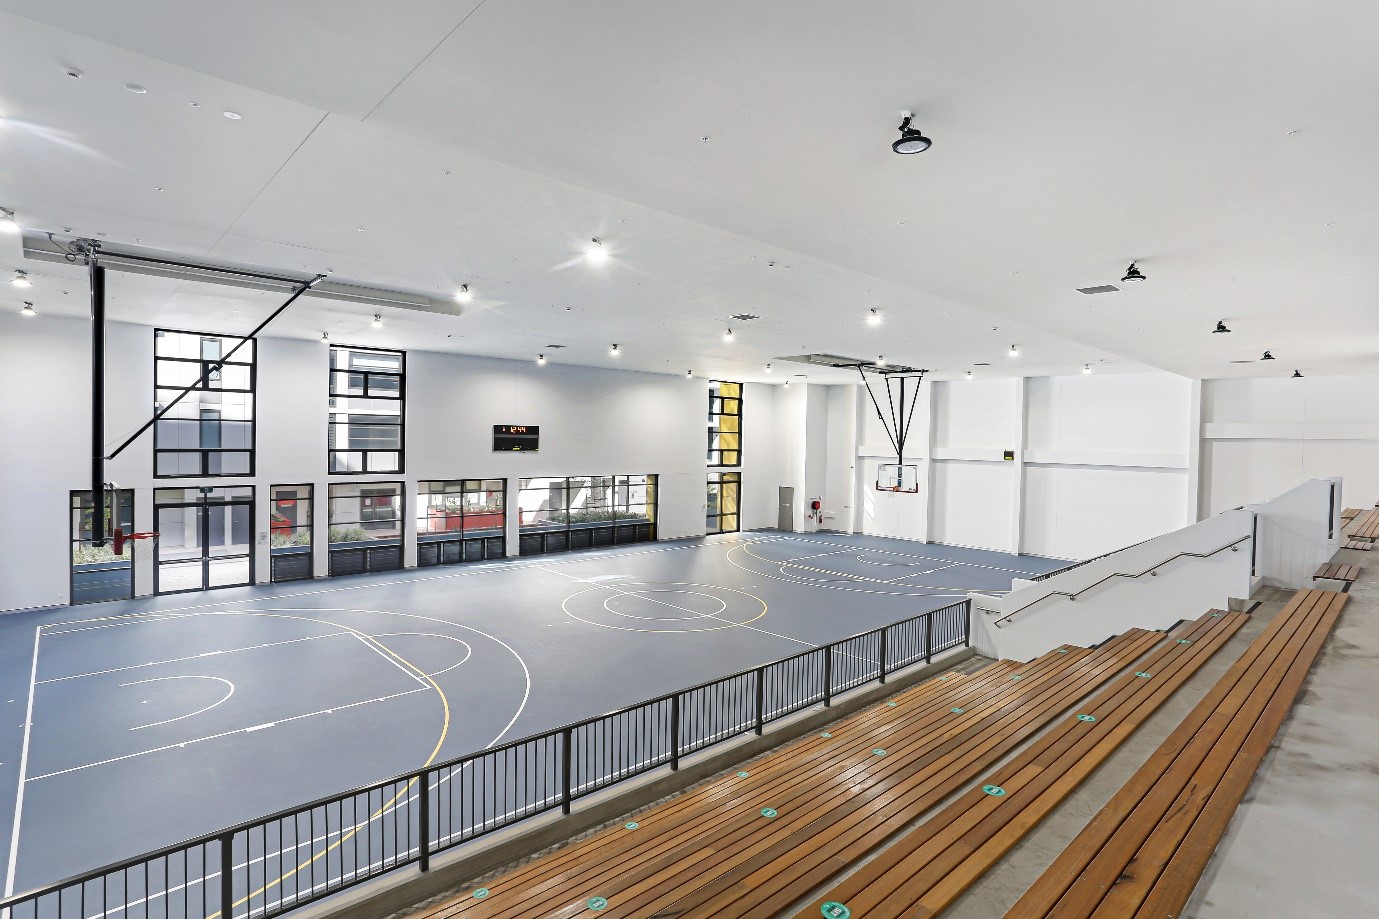 image showing first floor court